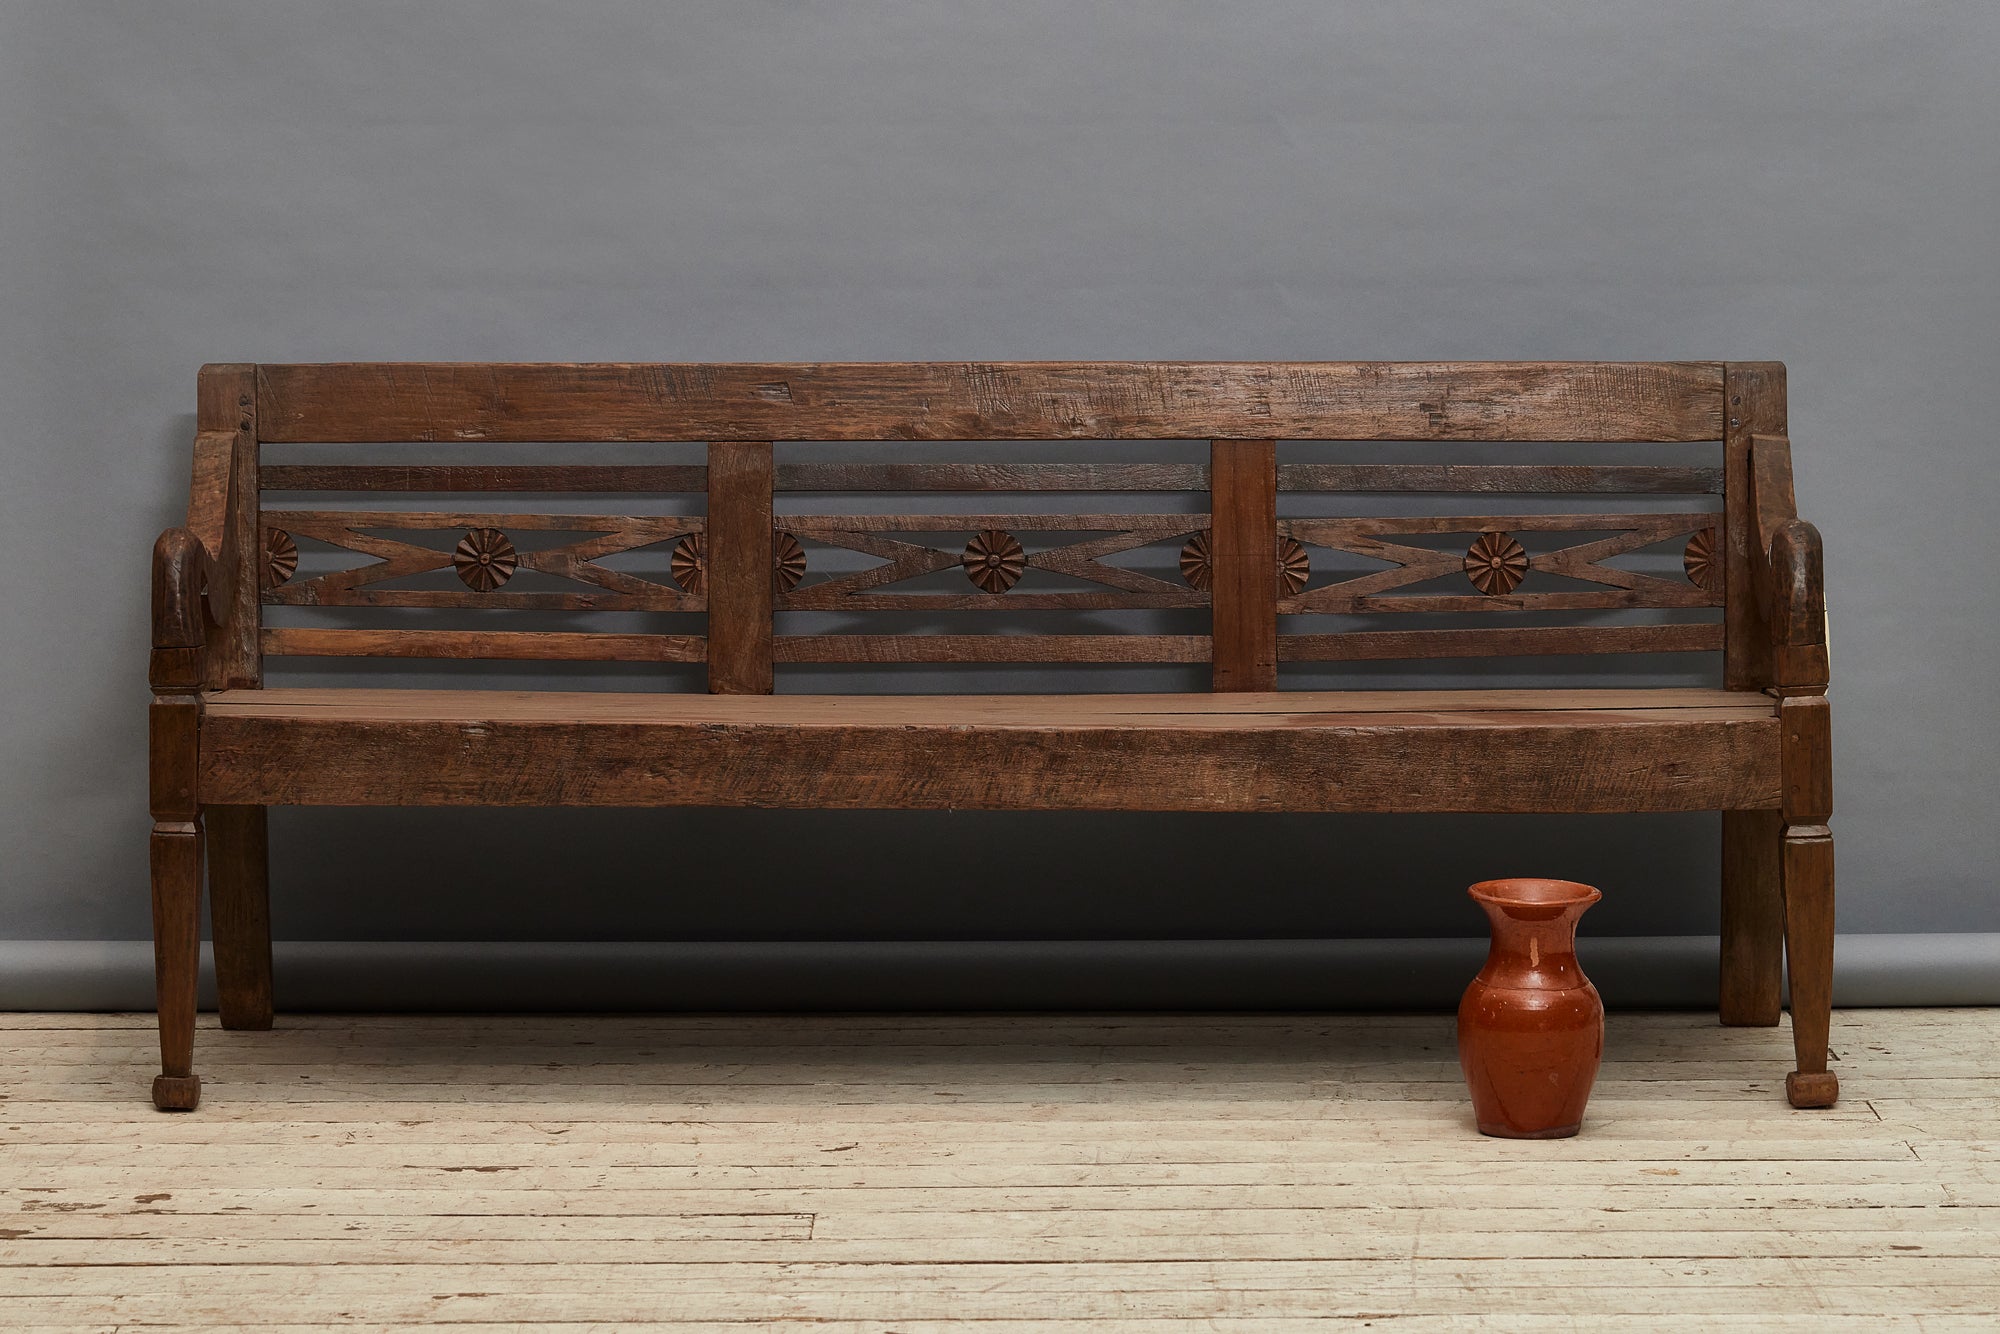 Teak Dutch Colonial Bench with Squared Tapered Leg from the Island of Sumatra